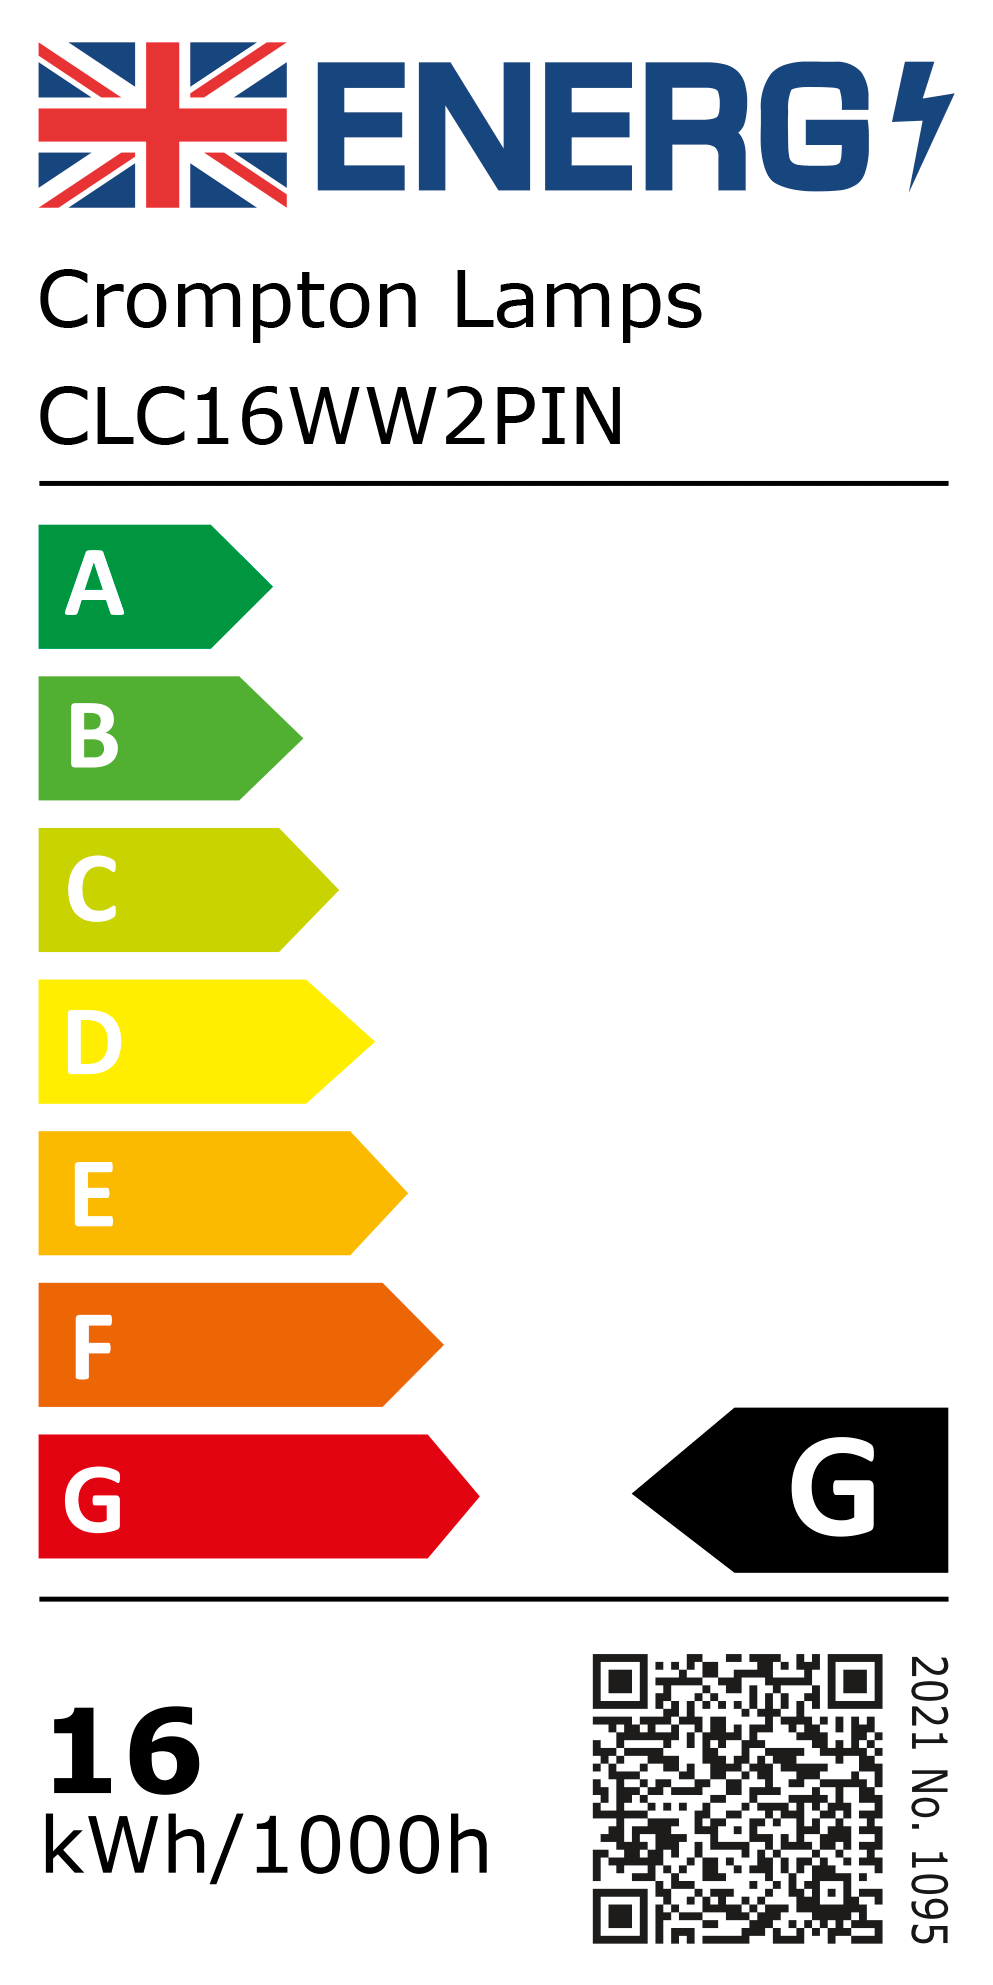 New 2021 Energy Rating Label: Stock Code CLC16WW2PIN